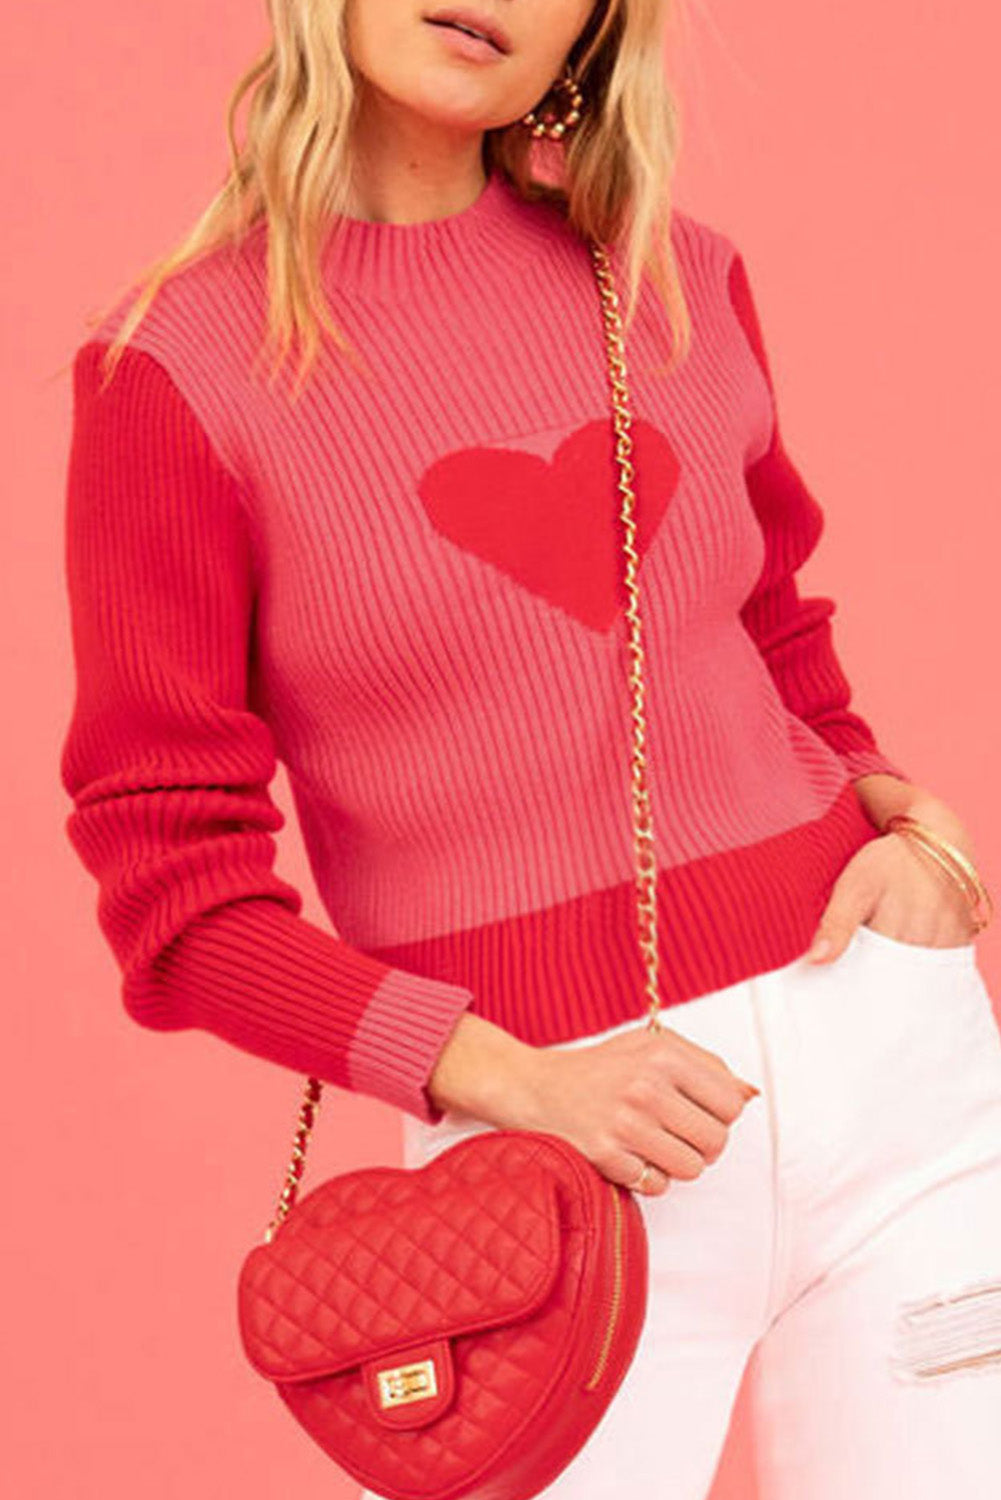 Bright Pink Valentine Colorblock Heart Print Ribbed Sweater